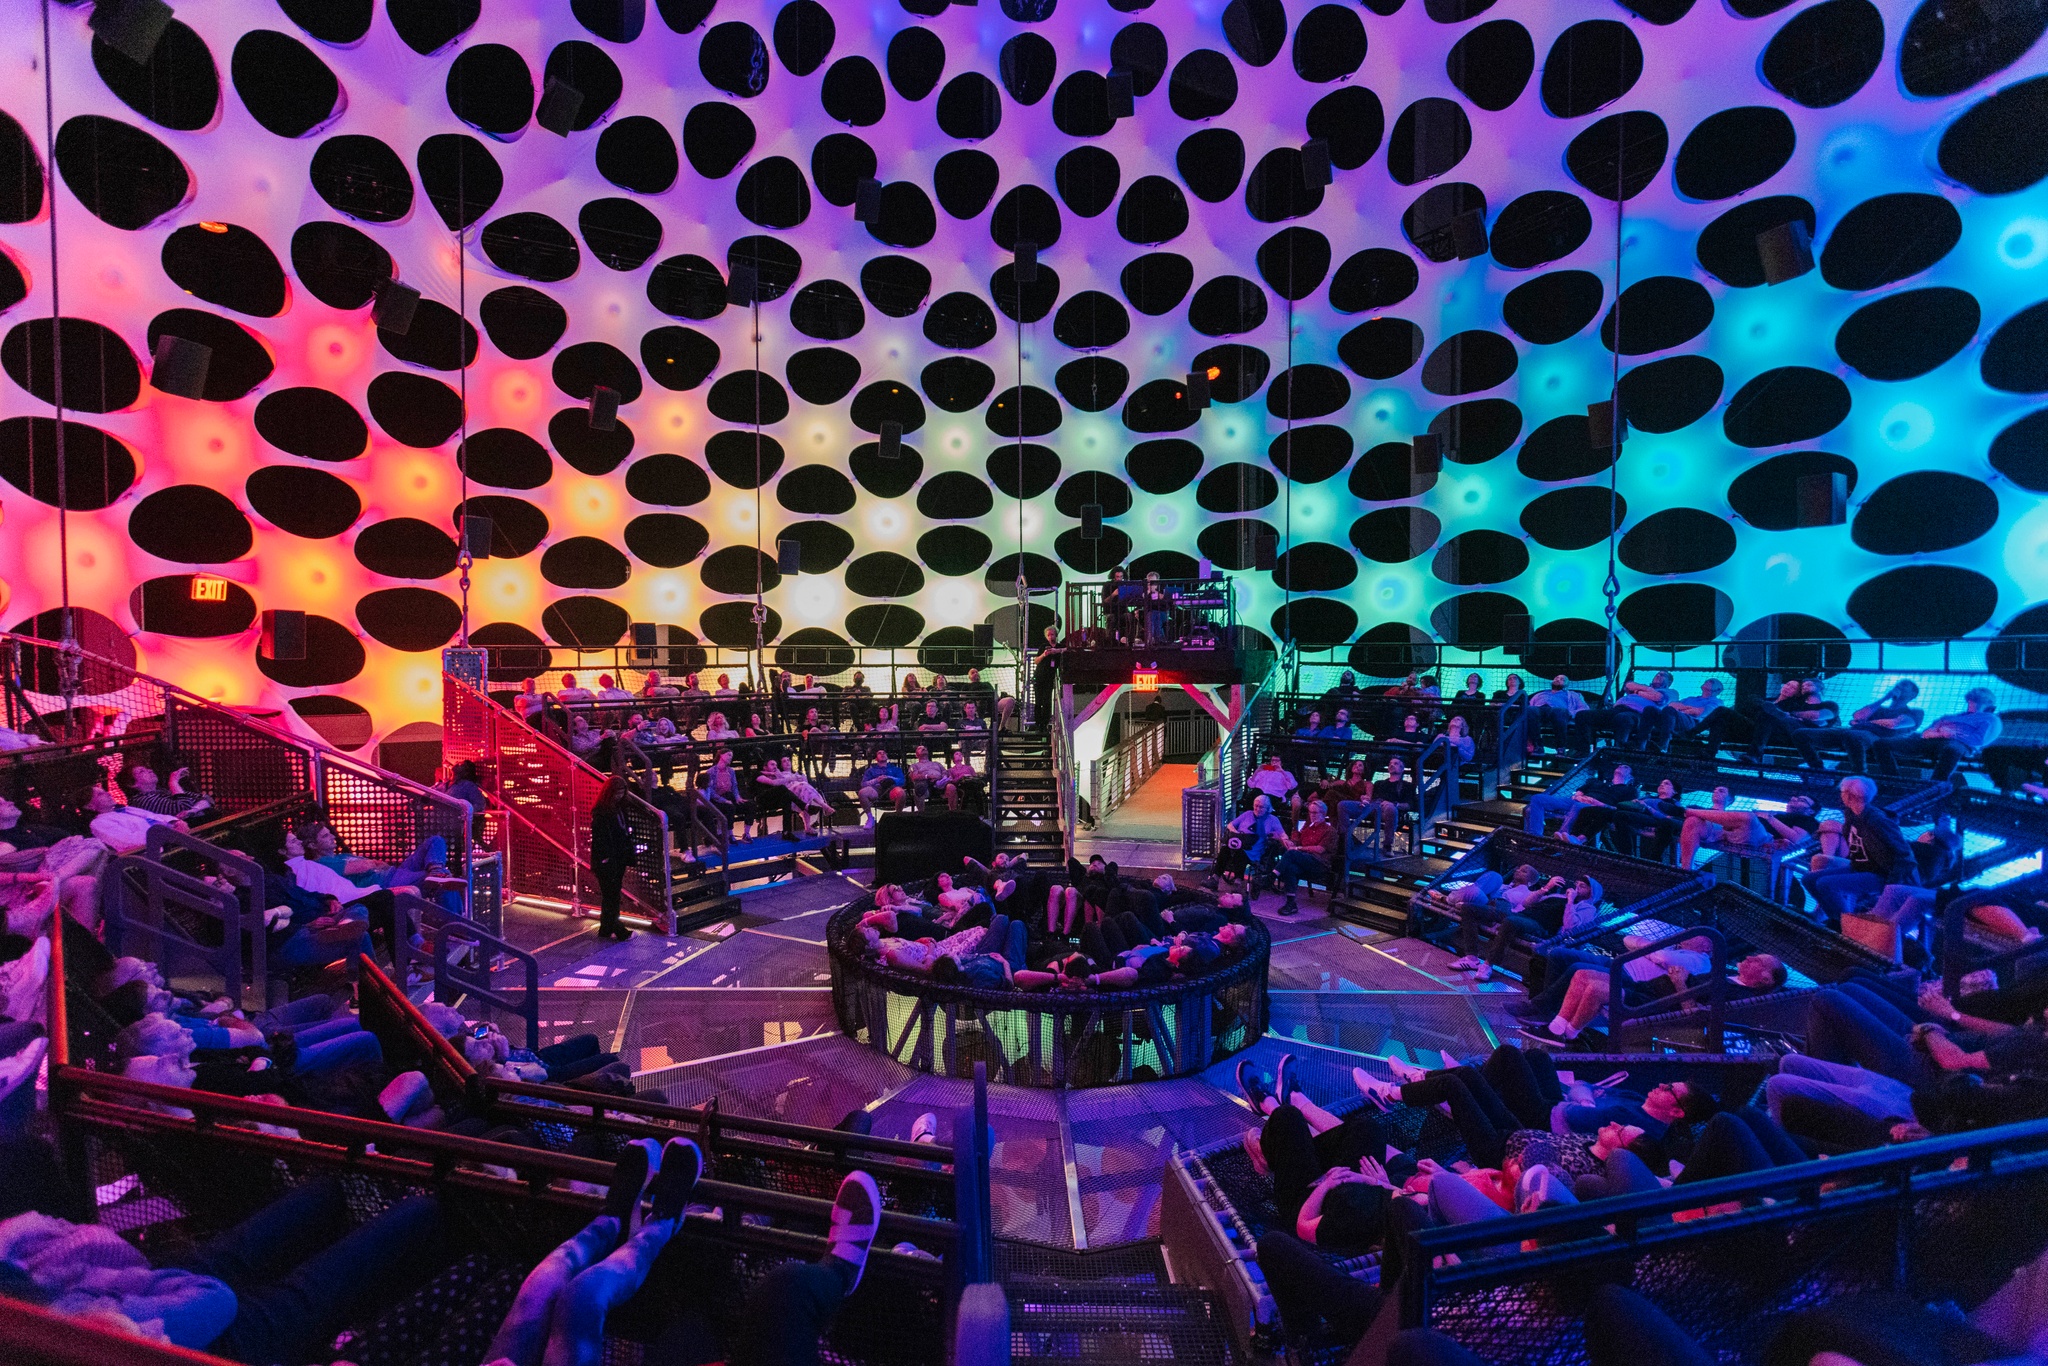 People in relaxed poses lie on their backs on netted seating banks inside a concert hall with a spherical wall. The curved wall towers above the audience and is porous and composed of light nodes that emanate orange, blue, and purple light.